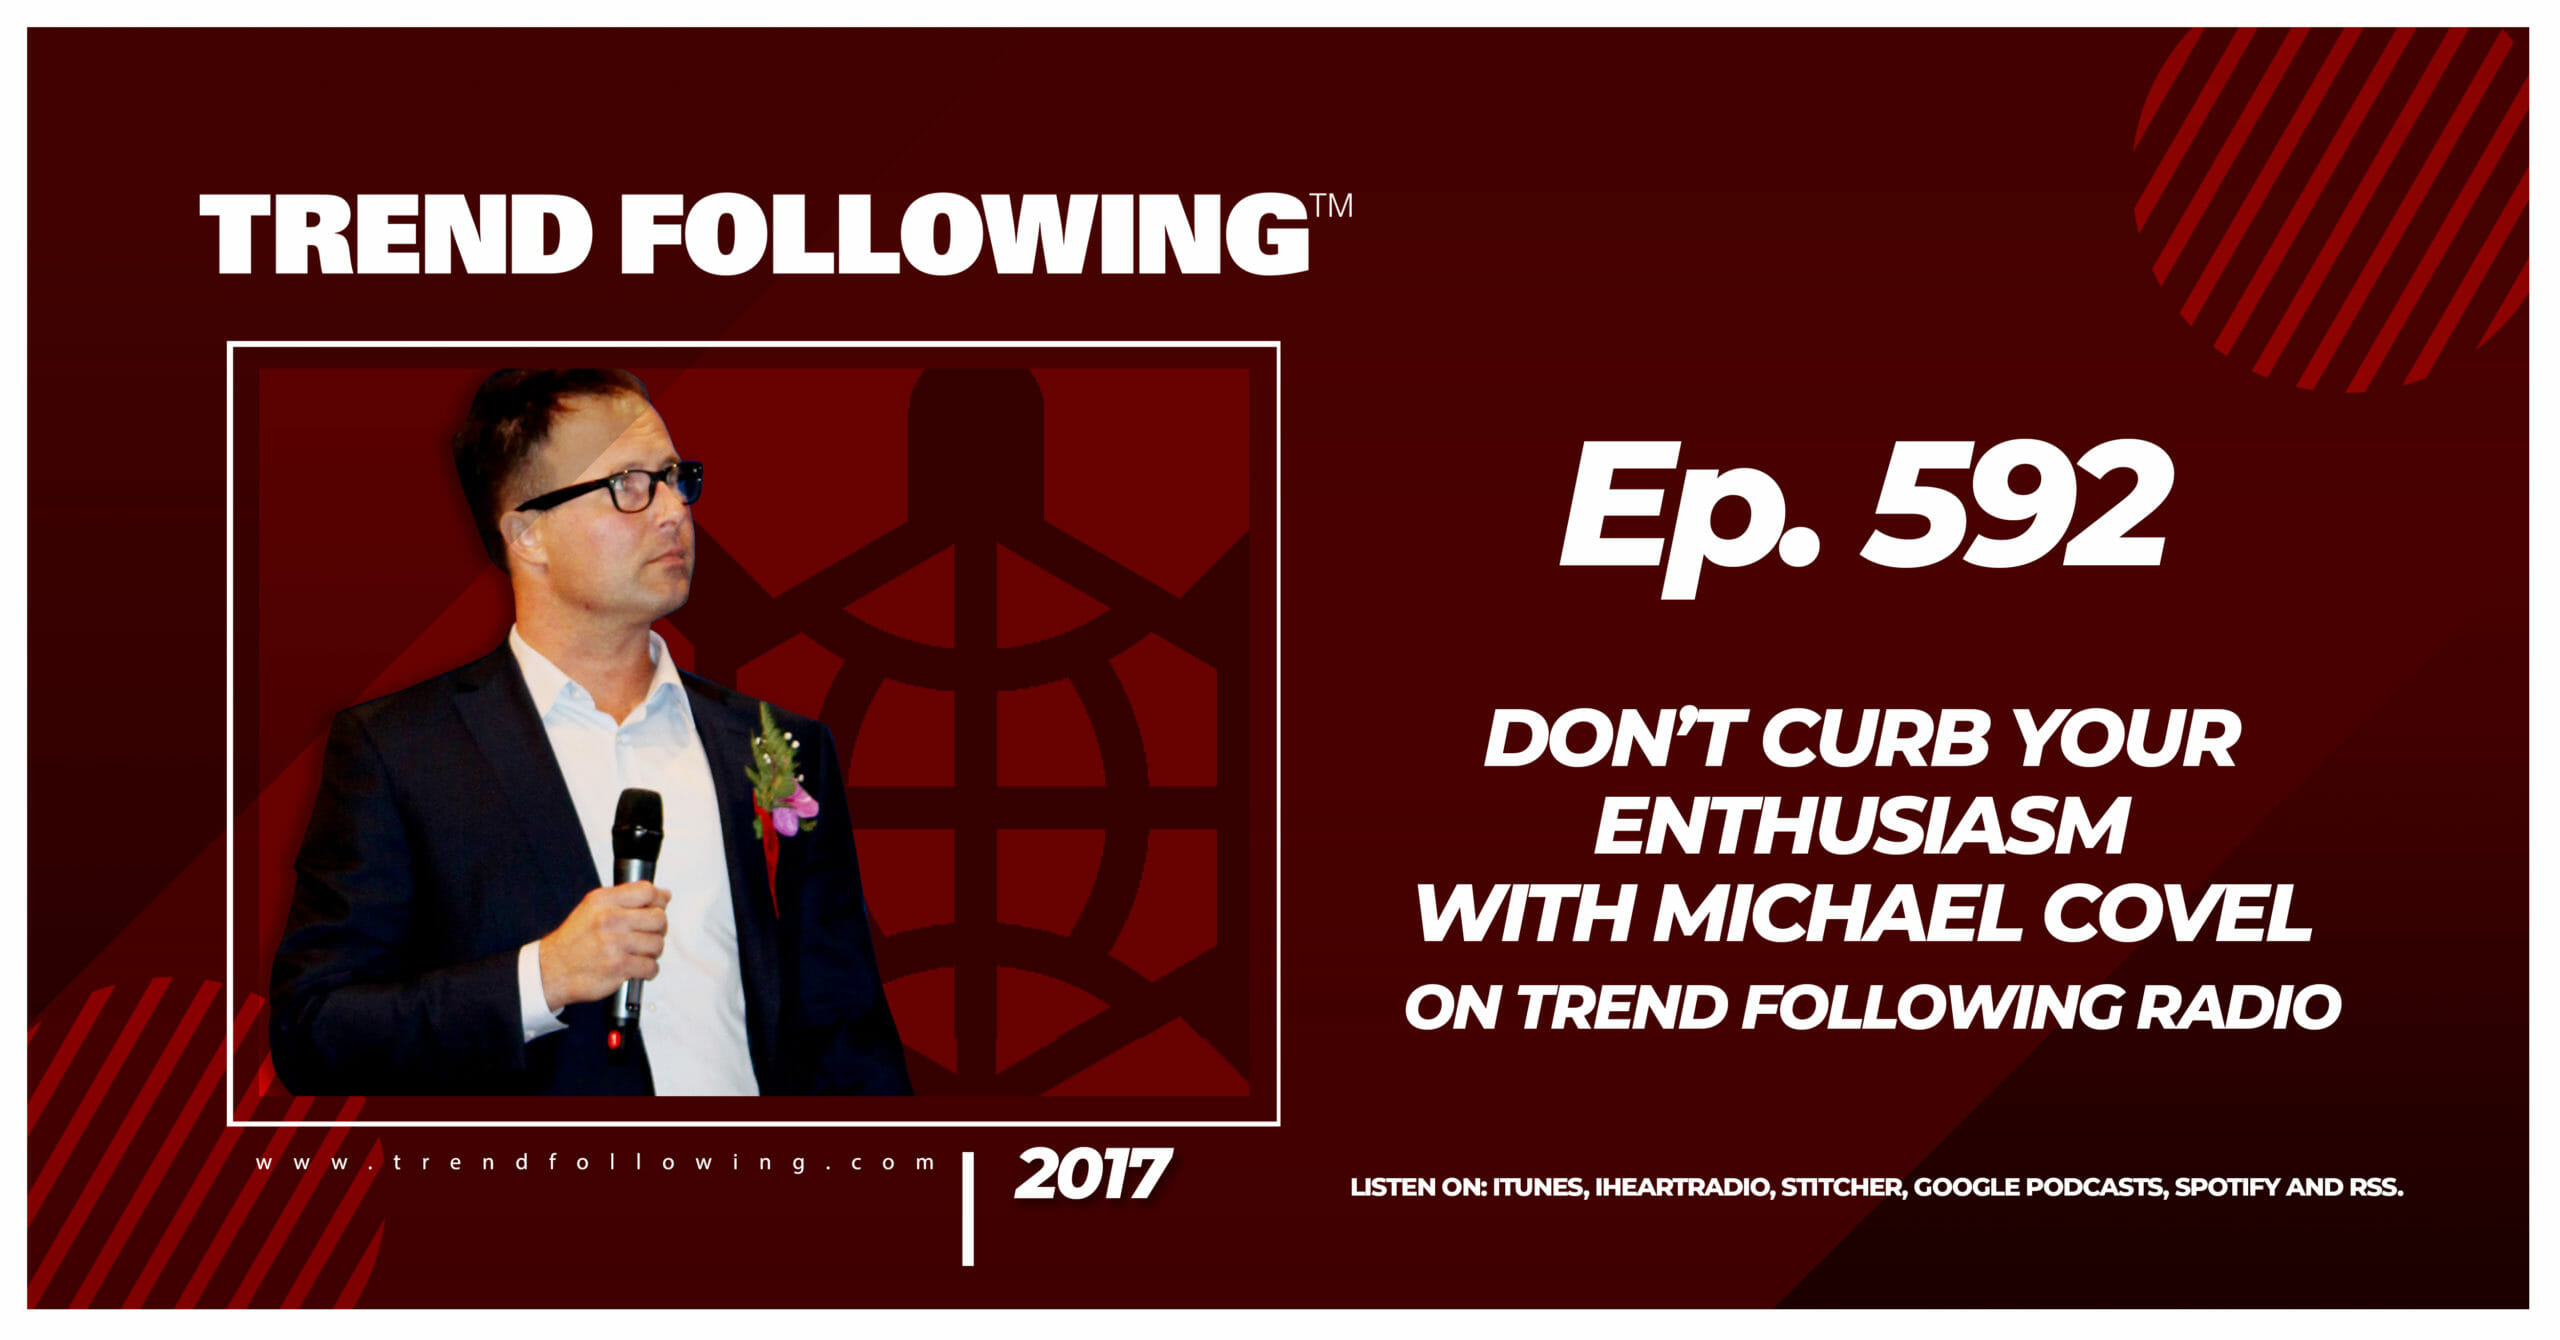 Don’t Curb Your Enthusiasm with Michael Covel on Trend Following Radio